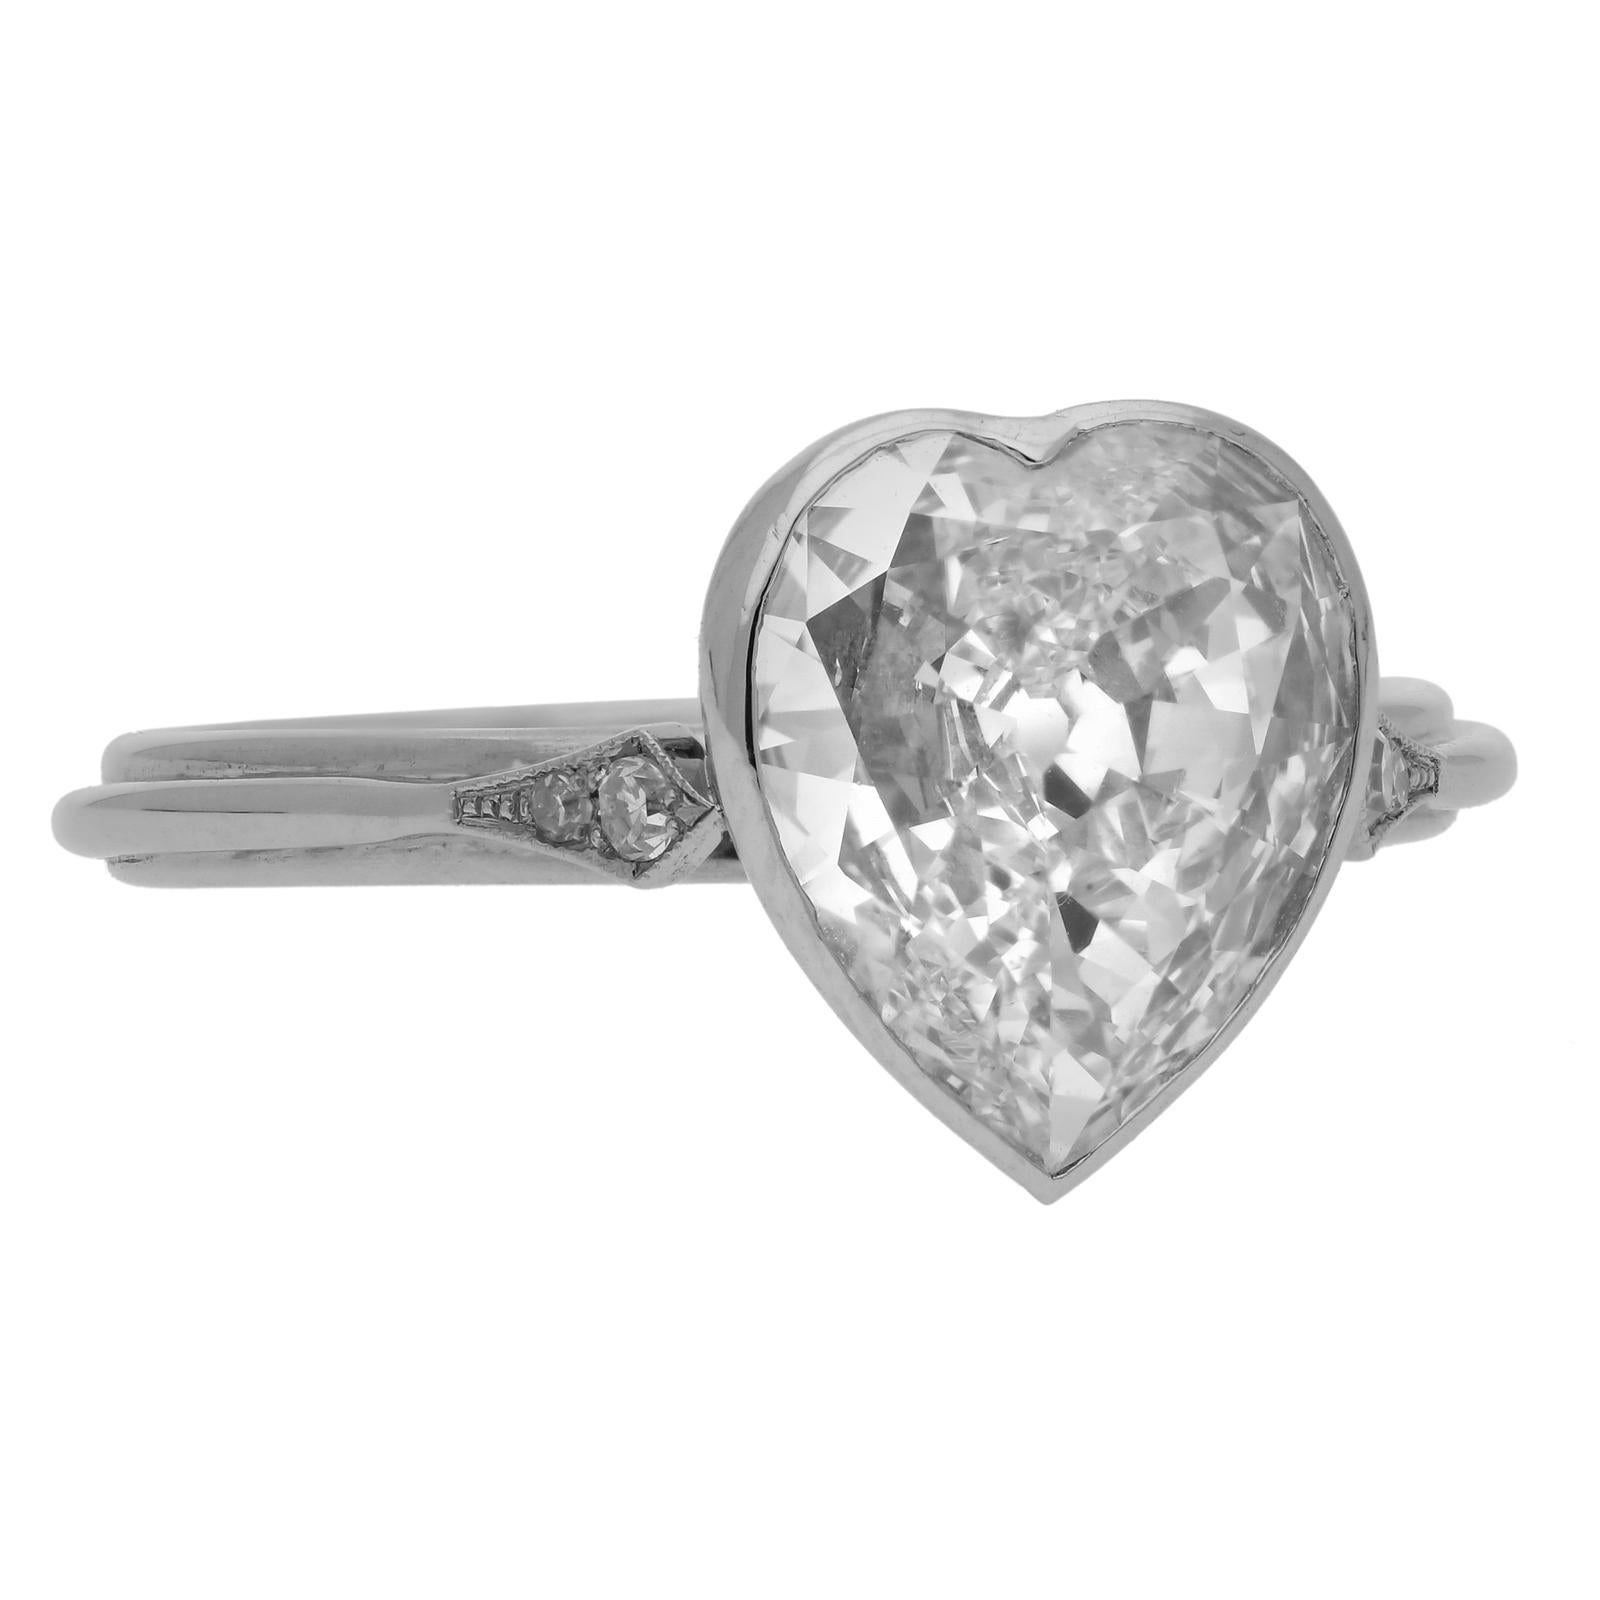 A beautiful rare and romantic heart old mine diamond solitaire ring by Hancocks, set with a heart-shaped old-cut diamond weighing 1.72cts and of H colour and VS2 clarity in a hand-made platinum bezel setting with pierced gallery and with single cut